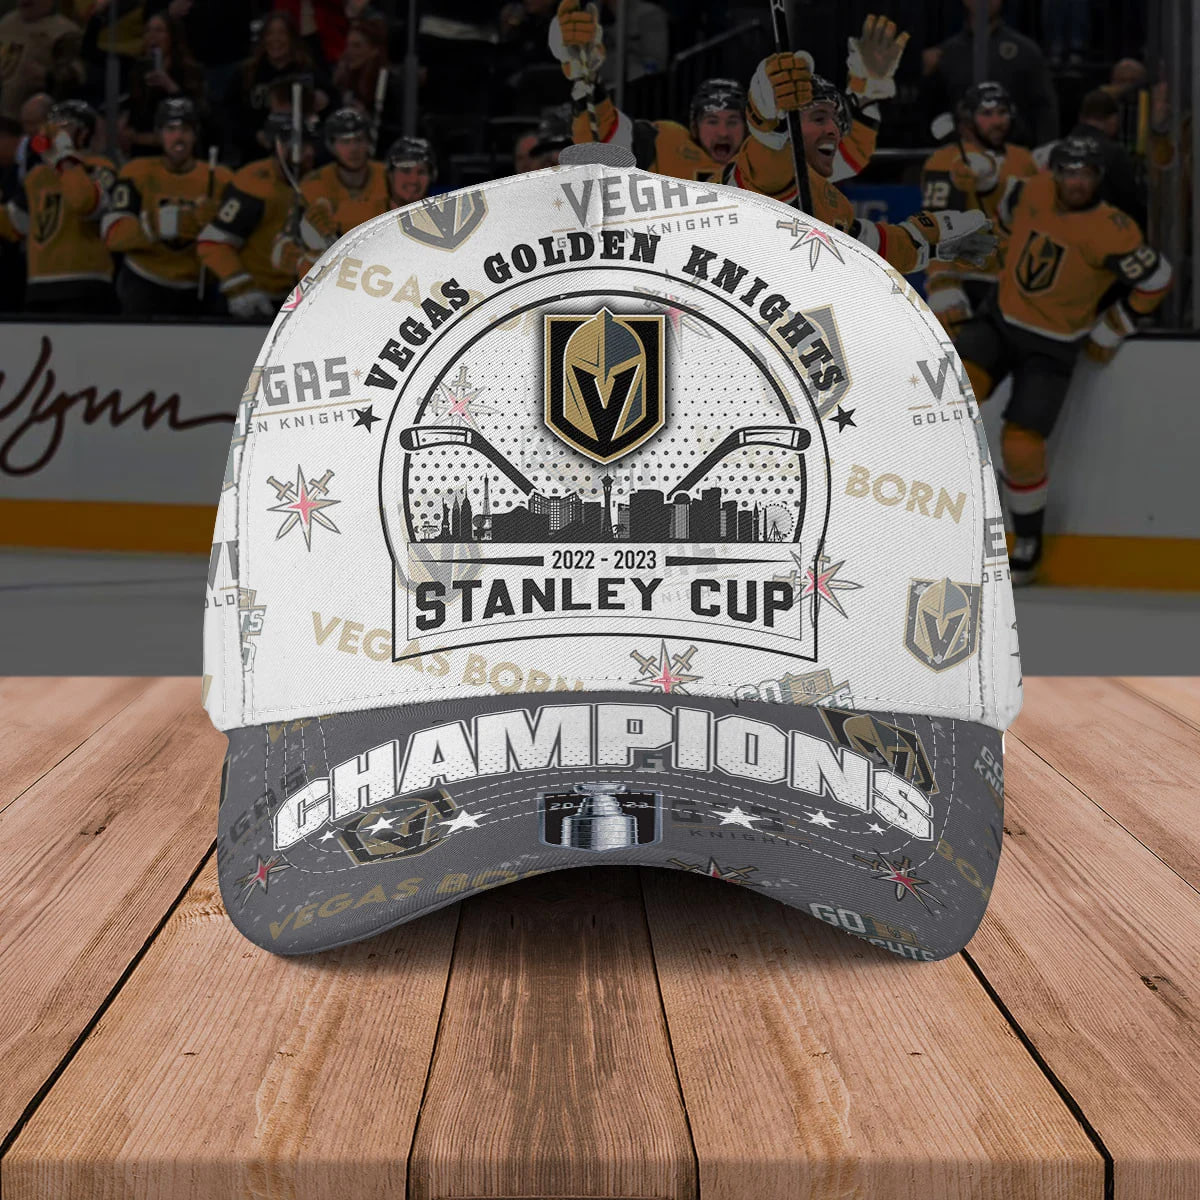 Vegas Golden Knights Champions NHL 2023 – Shoes - BTF Store